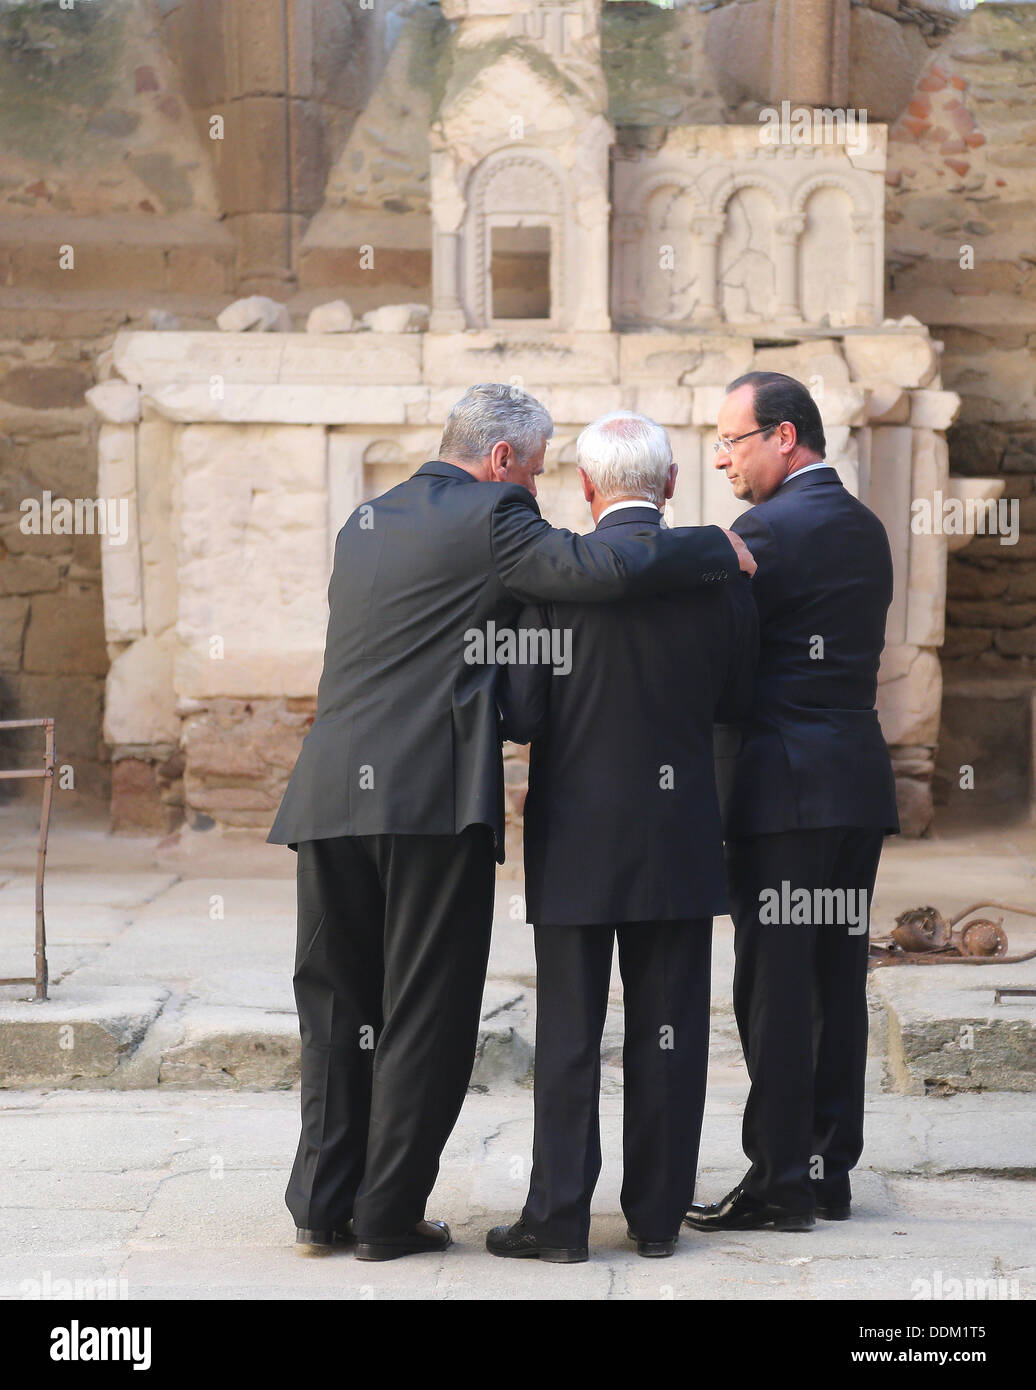 Oradour-sur-Glane, France. 04th Sep, 2013. German President Joachim Gauck (L), French President Francois Hollande (R) and survivor of the massacre in Oradour-sur-Glane during World War II Robert Hebras are pictured at the memorial site in Oradour-sur-Glane, France, 04 September 2013. A unit of SS officers murdered 642 citizens of the town in June 1944. The German President is on a three-day visit to France. Photo: WOLFGANG KUMM/dpa/Alamy Live News Stock Photo